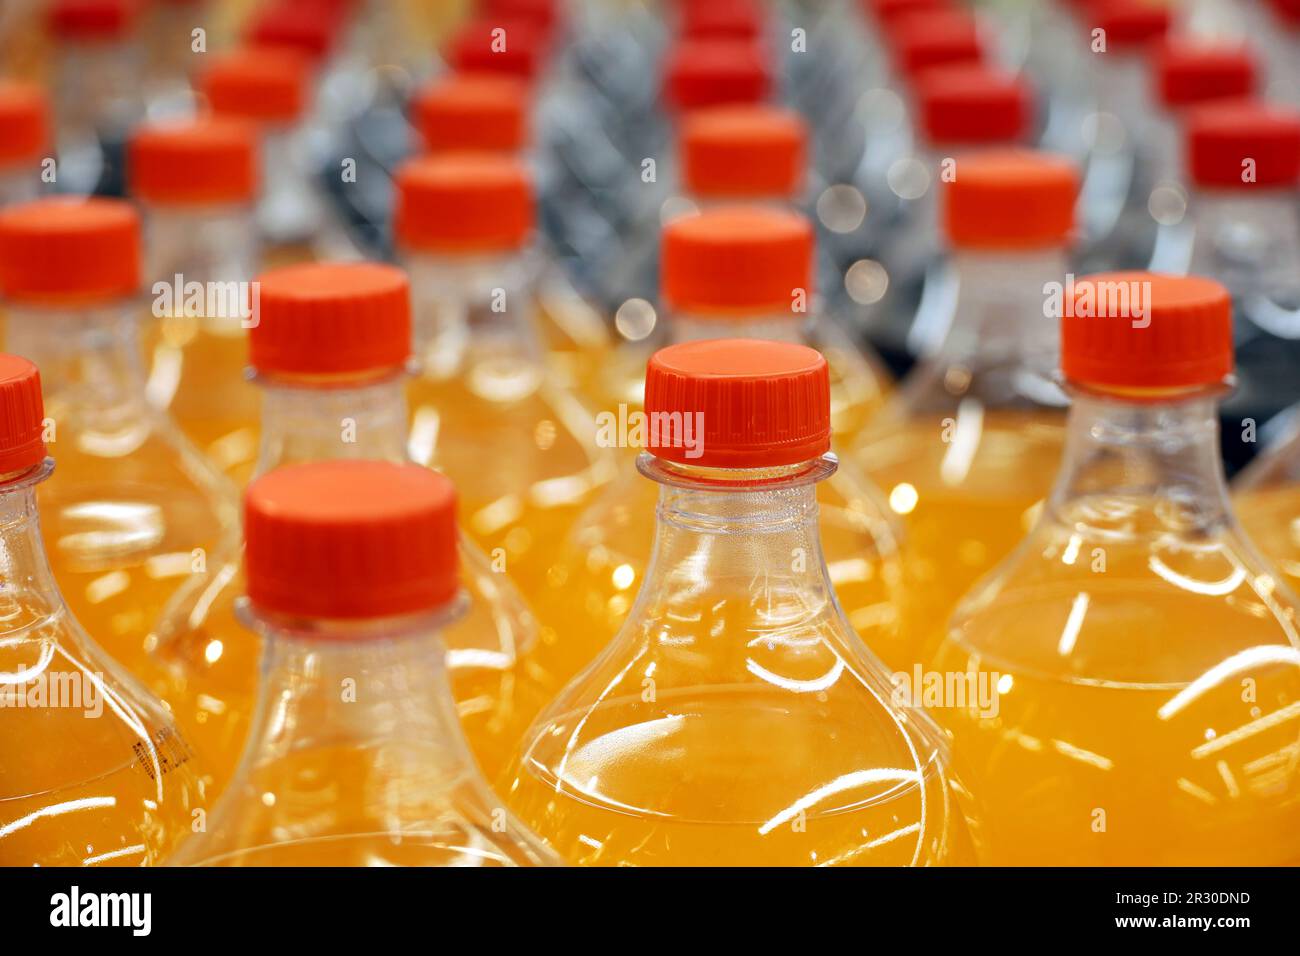 Plastic bottles of sweet soda in a row, selective focus. Soft drinks in a shop Stock Photo